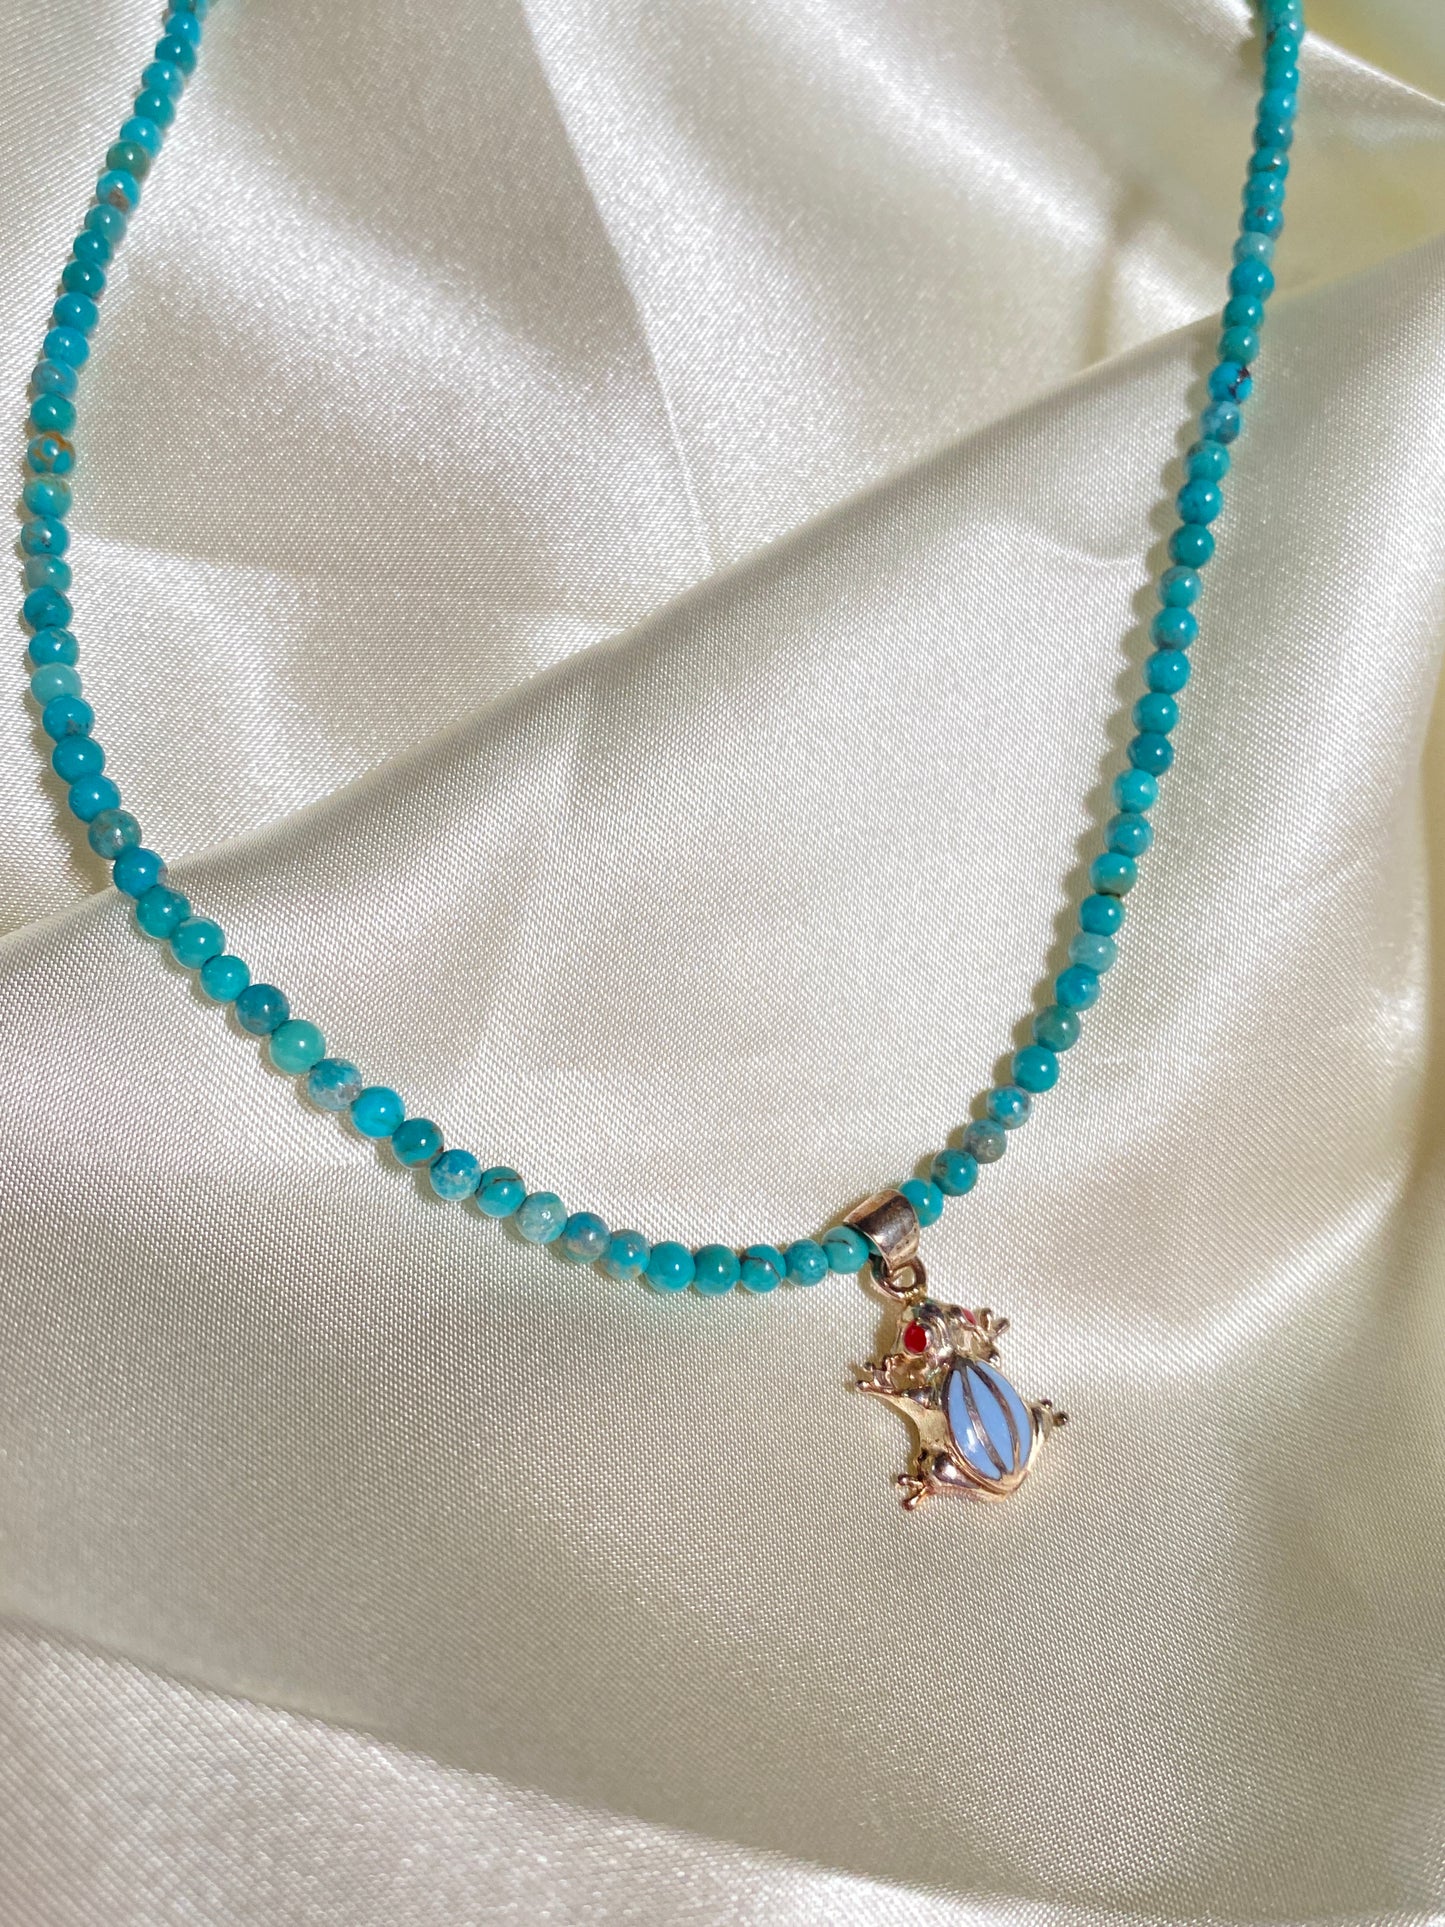 Turquoise Frog Beaded Necklace